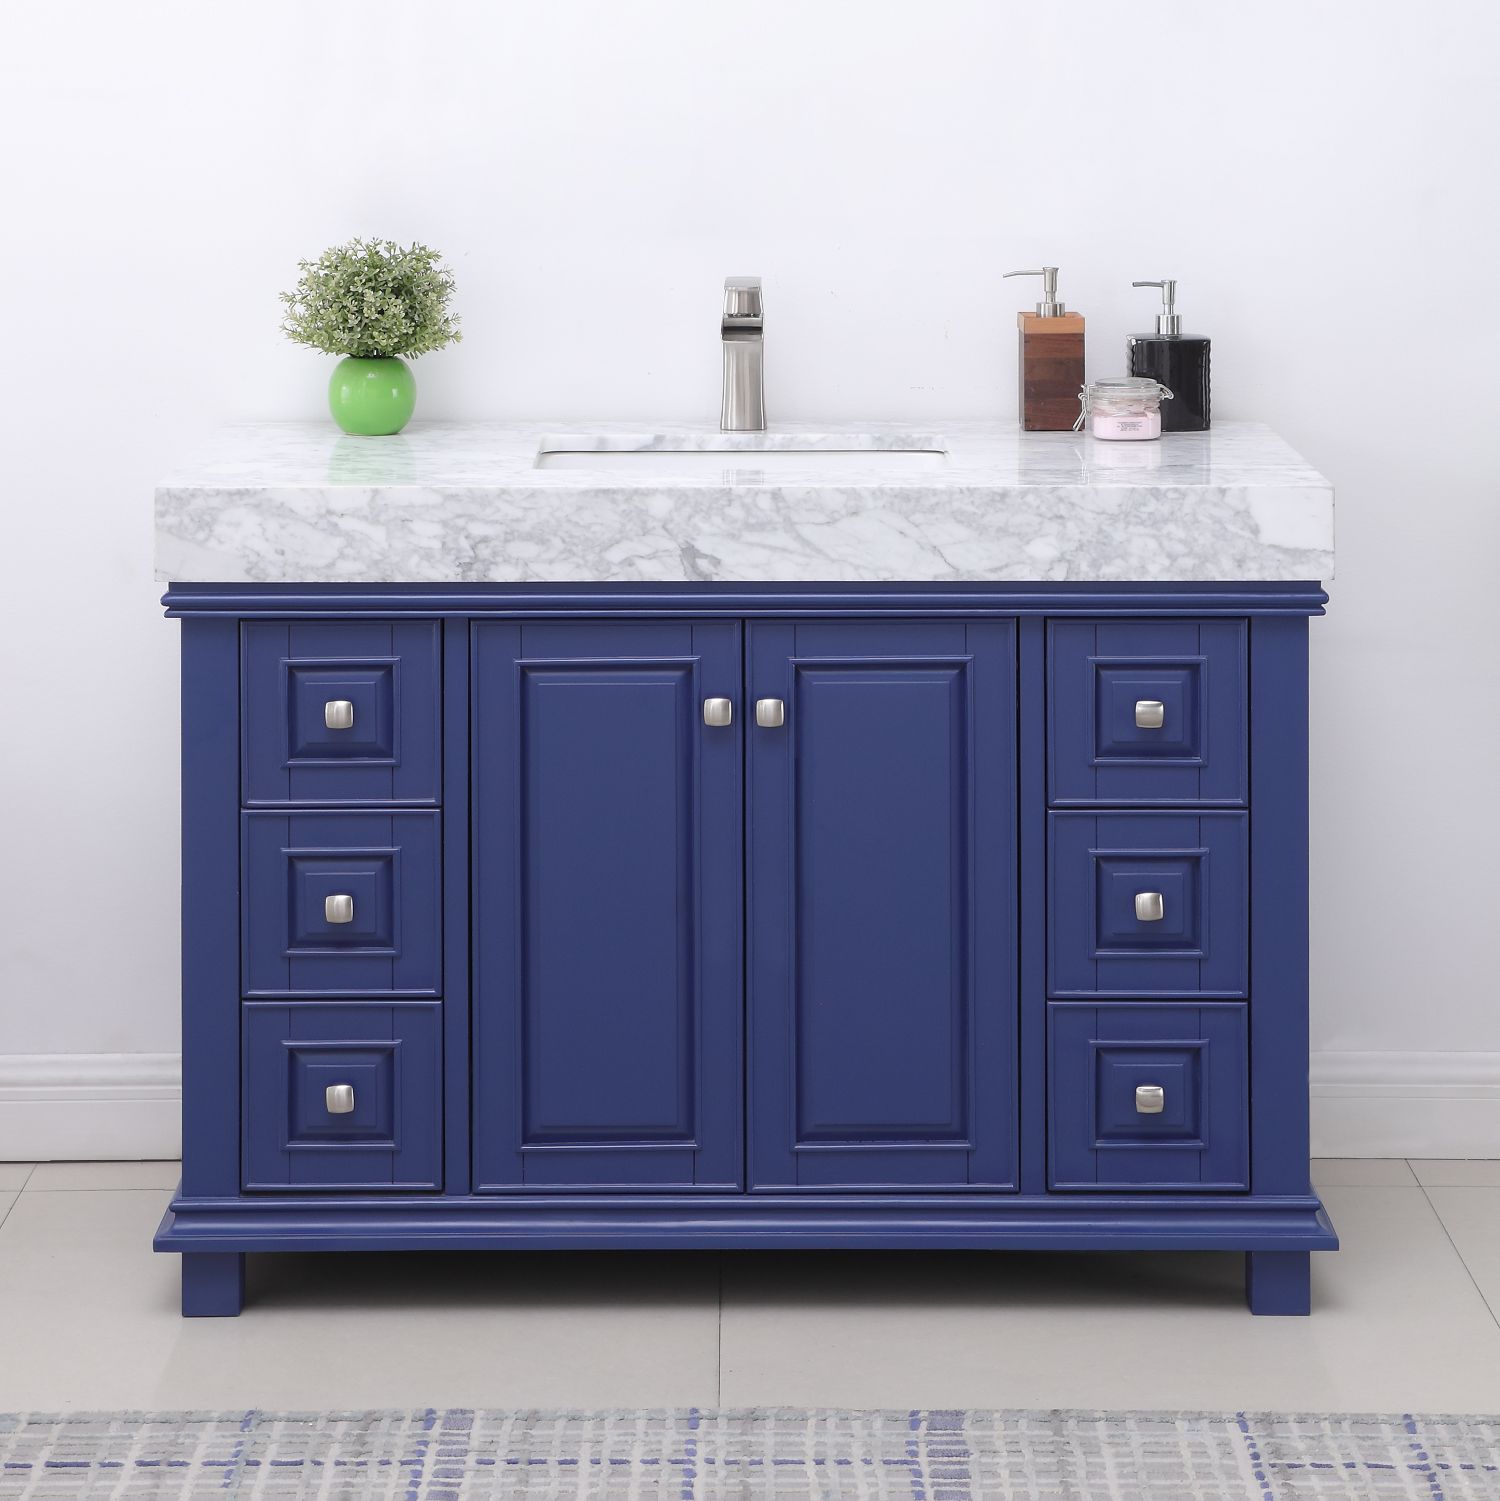 Issac Edwards Collection 48" Single Bathroom Vanity Set in Jewelry Blue and Carrara White Marble Countertop without Mirror